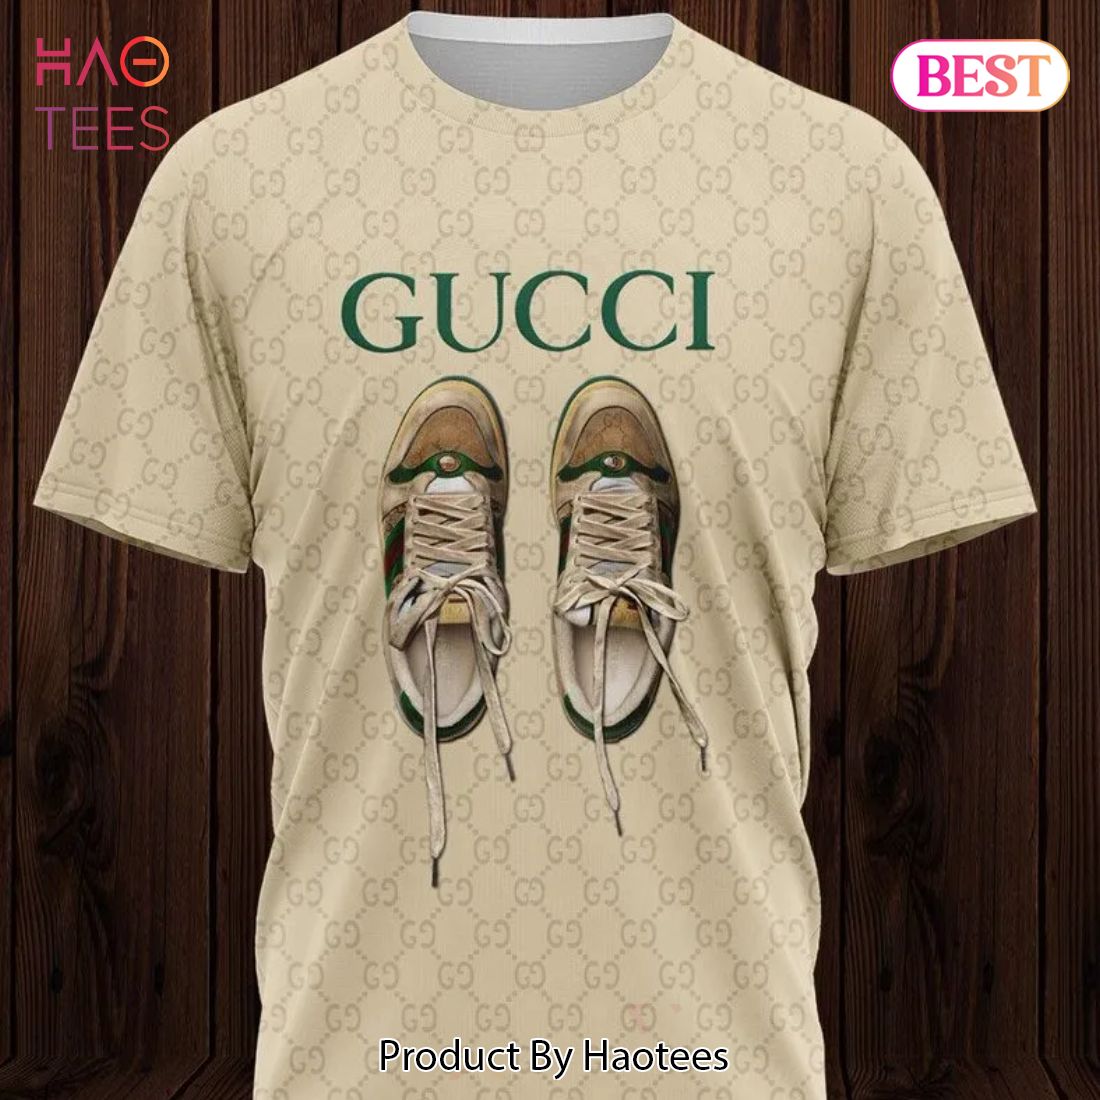 [NEW FASHION] Gucci Shoes Beige Luxury Brand T-Shirt Outfit For Men Women